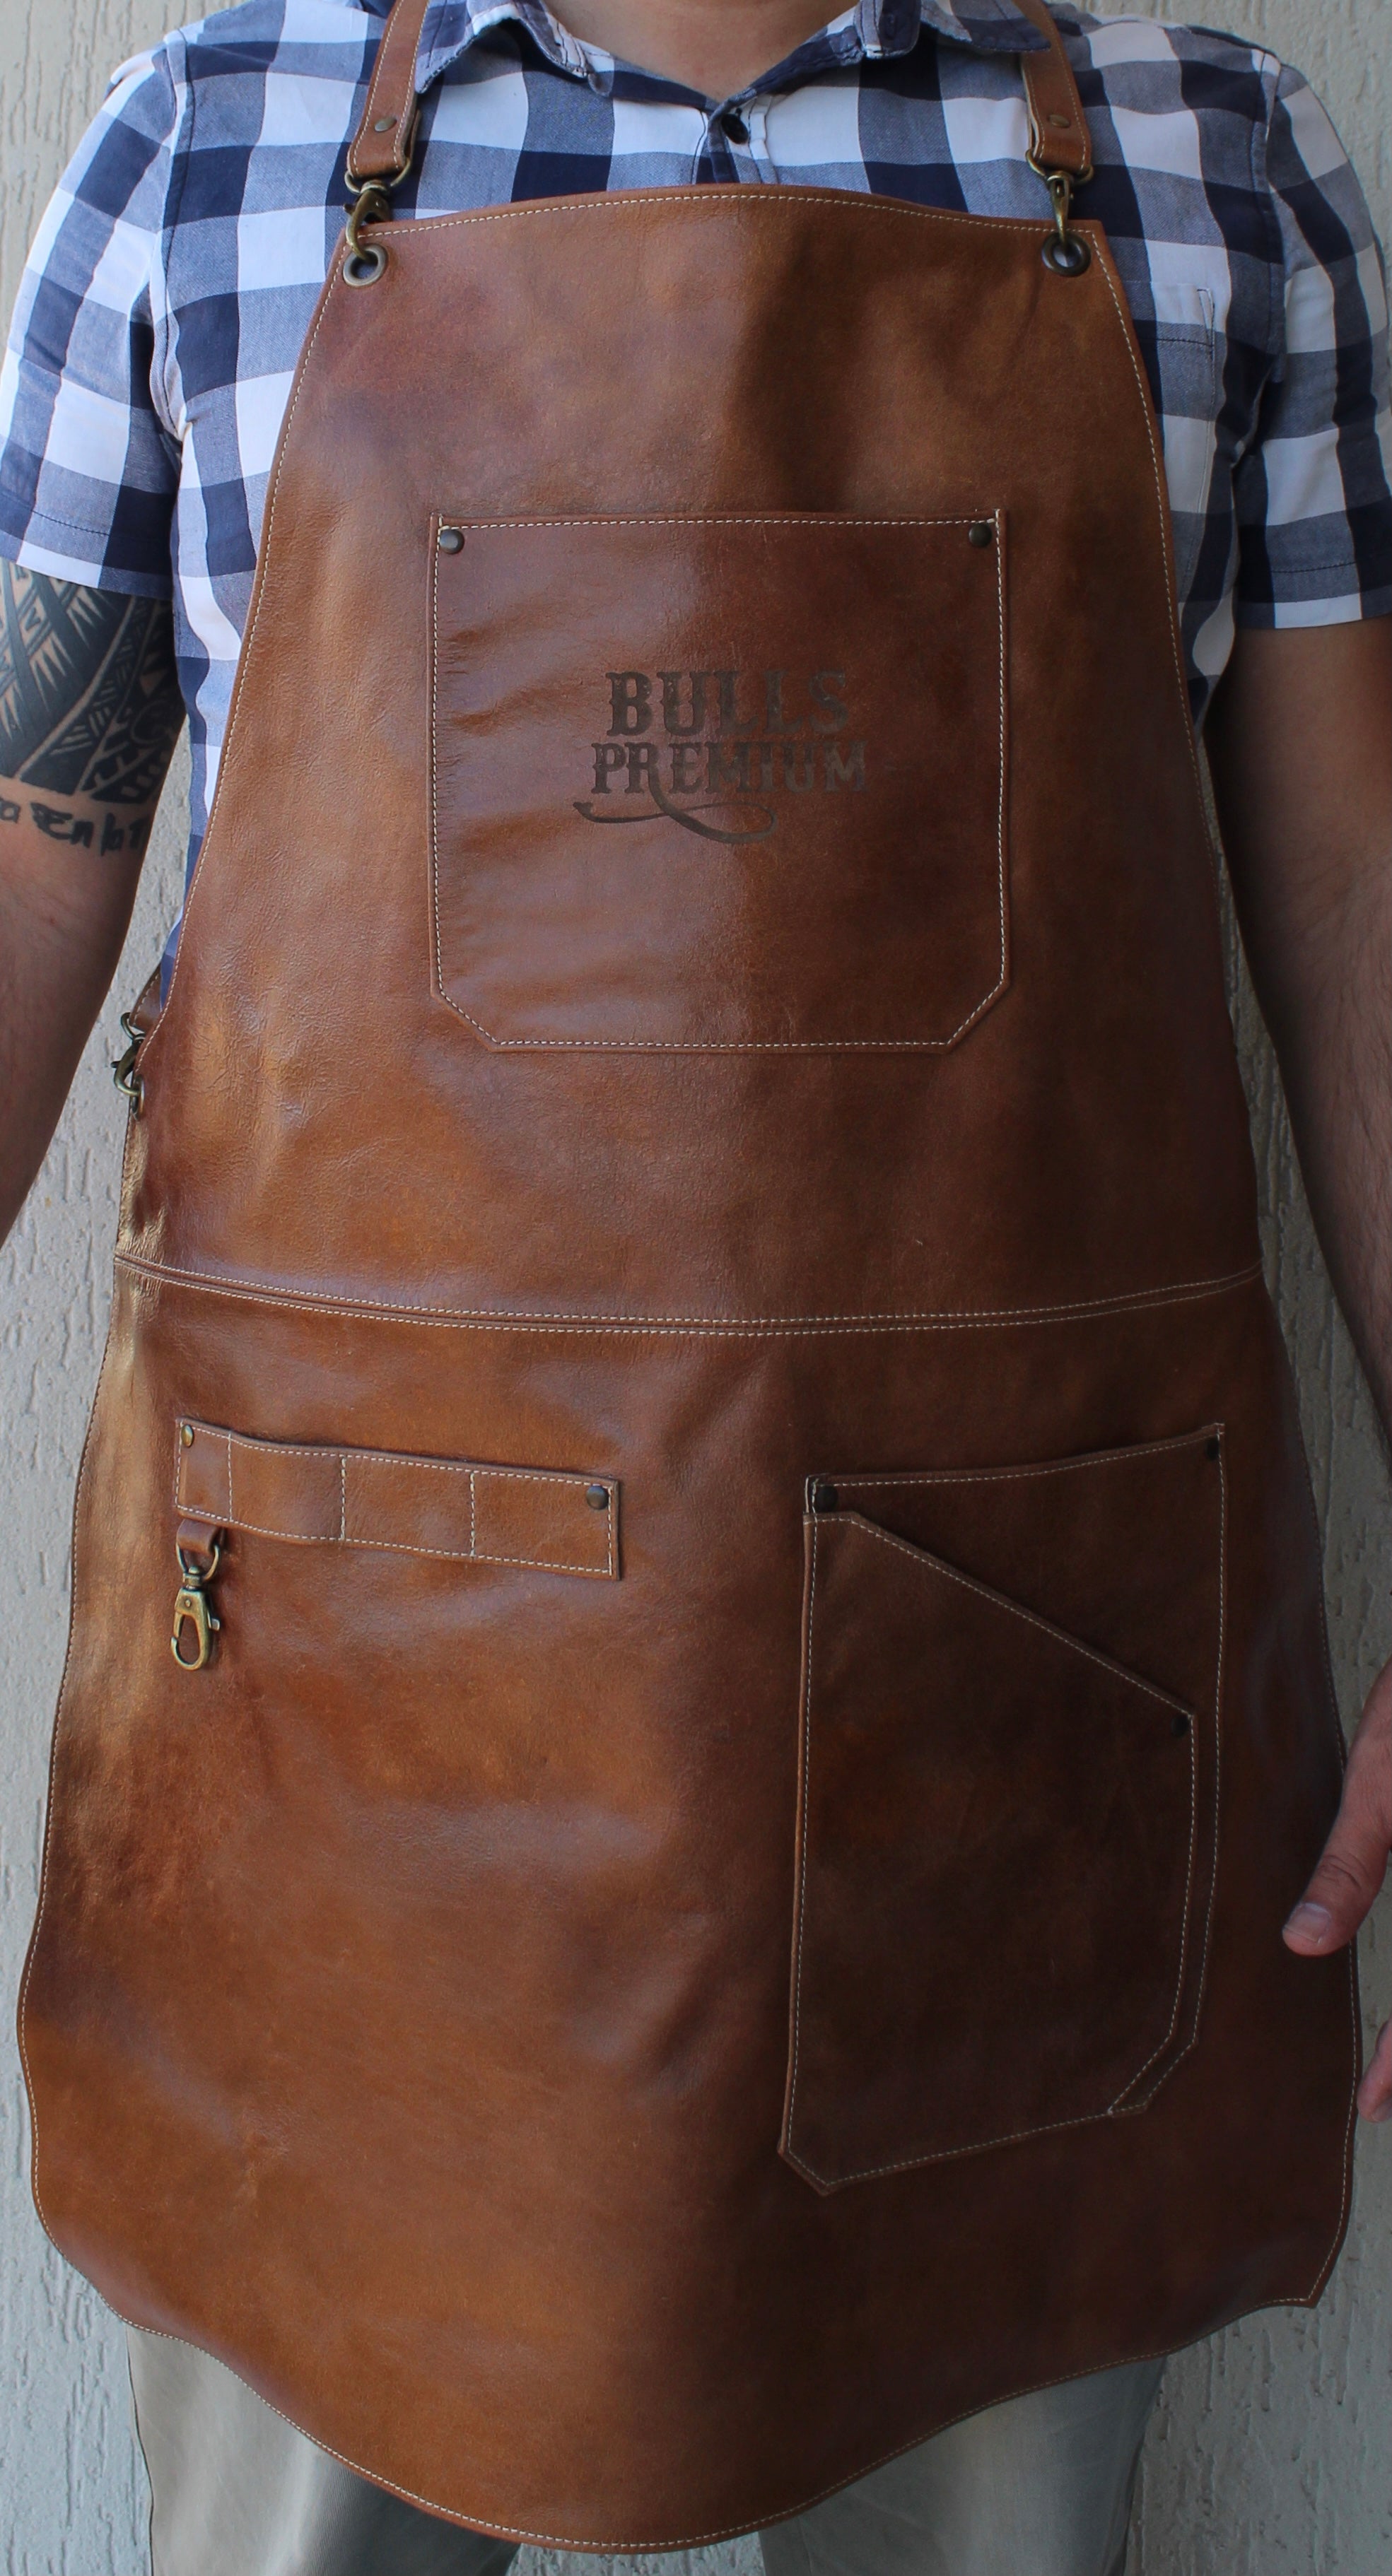 Hand Made - 100% Leather Apron Brown